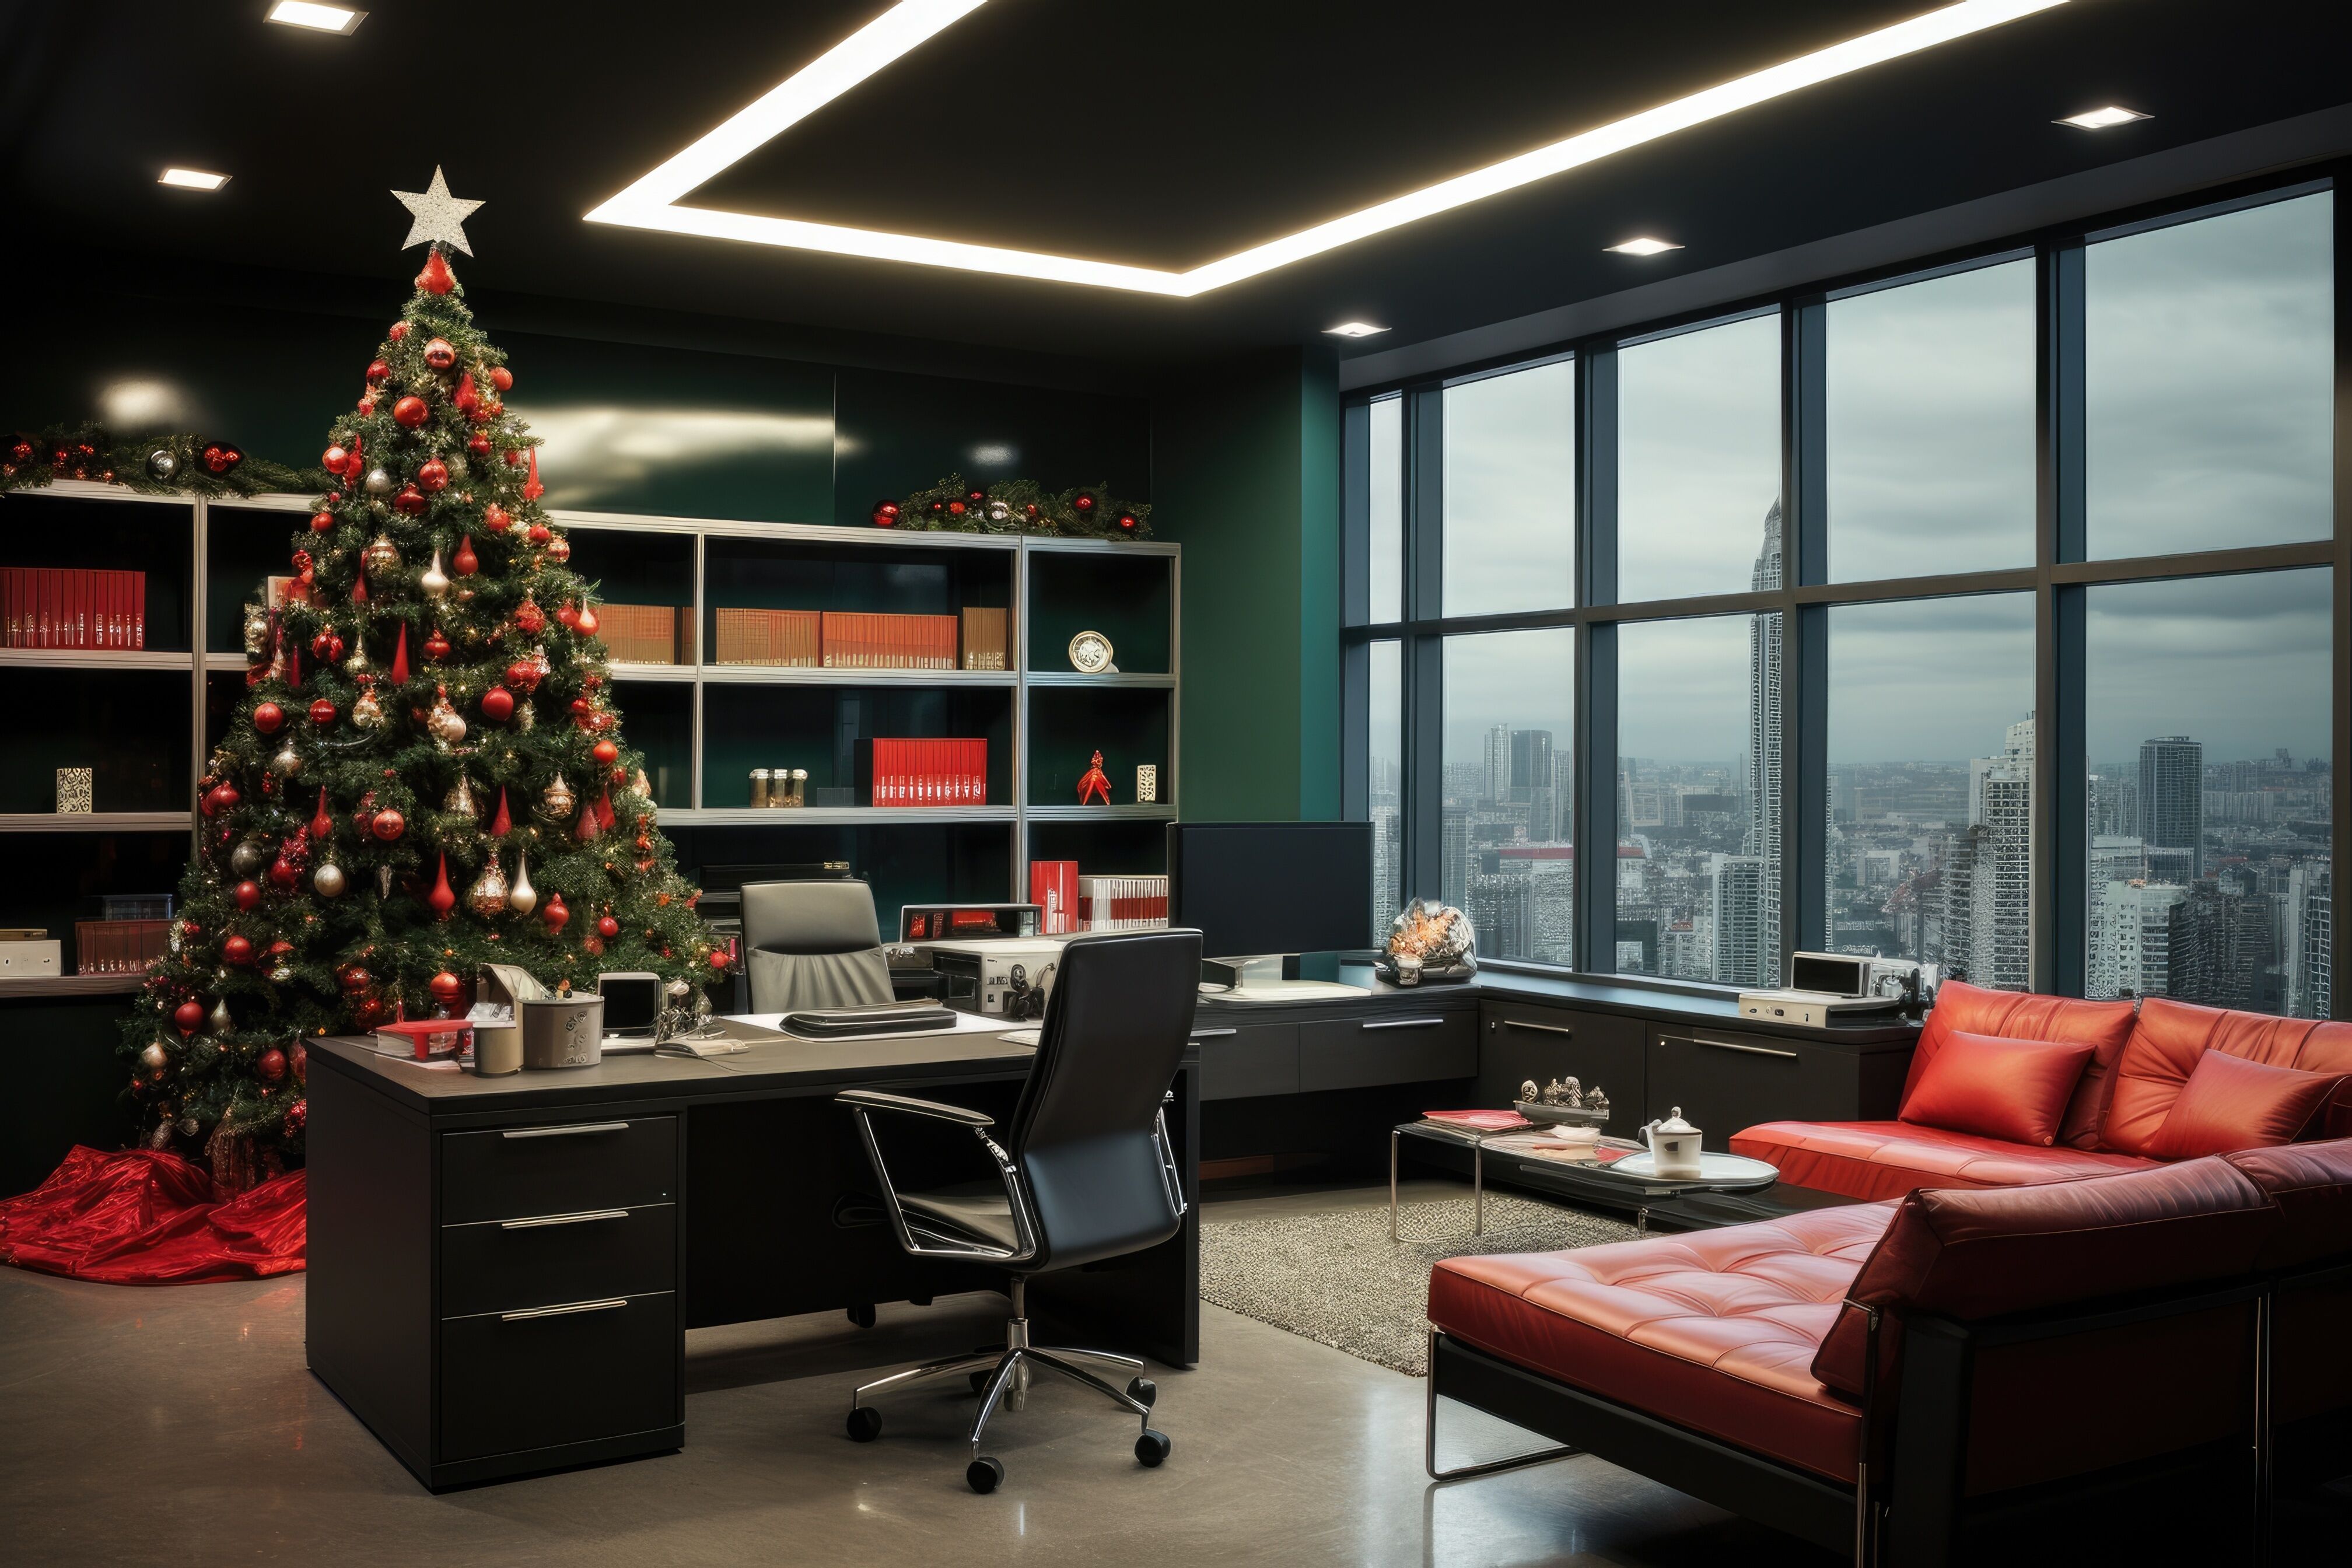 A lit Christmas tree standing in an office with holiday lighting installed by an expert from Custom Electrical Services .